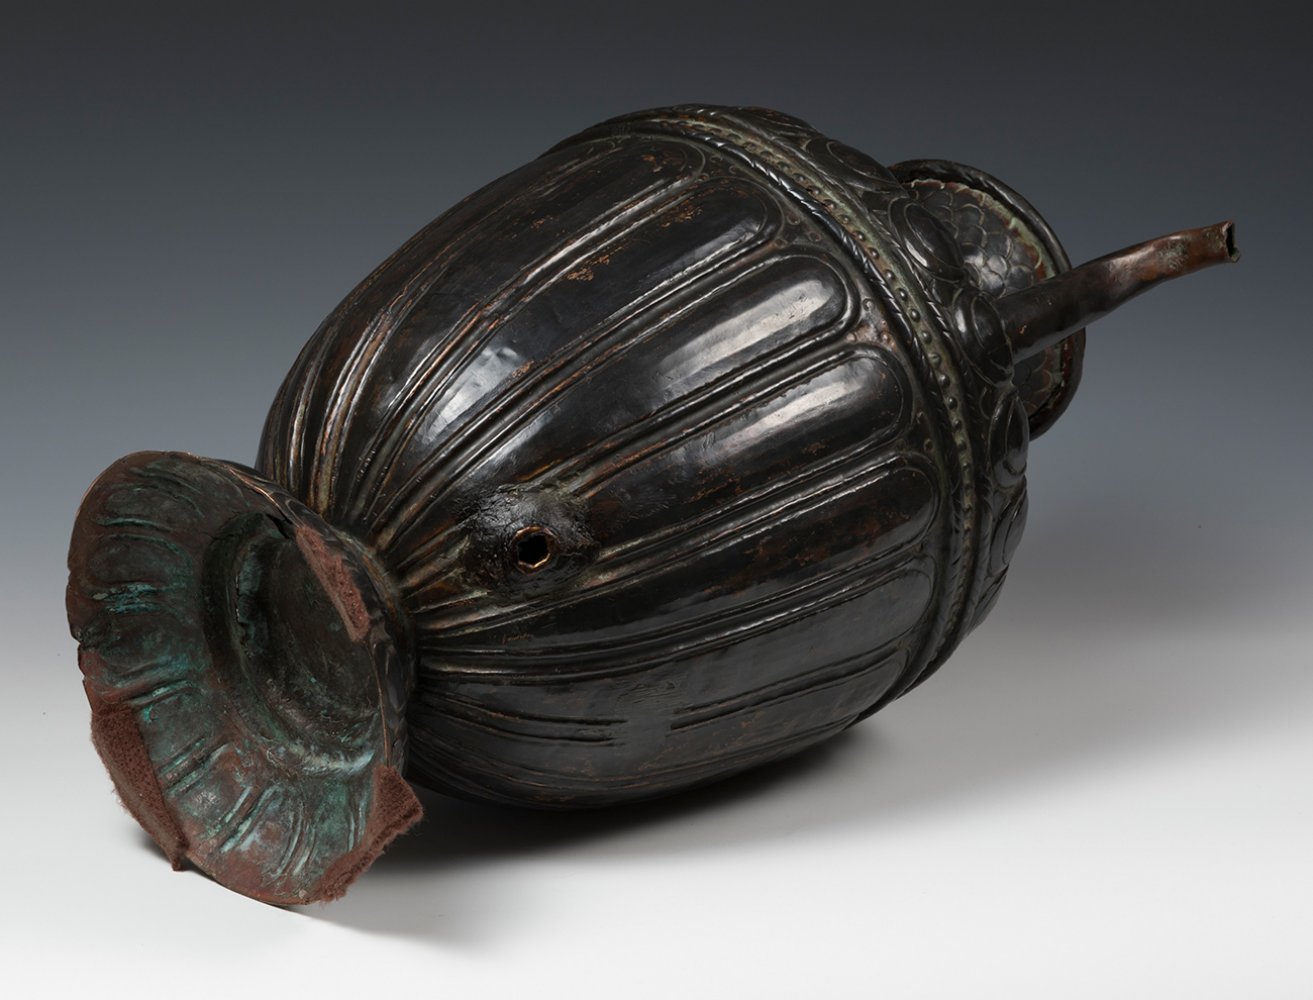 Jug; Italy, 16th-17th century.Patinated copper.With faults.Measurements: 39 x 29 x 23 cm.Jug made of - Image 5 of 7